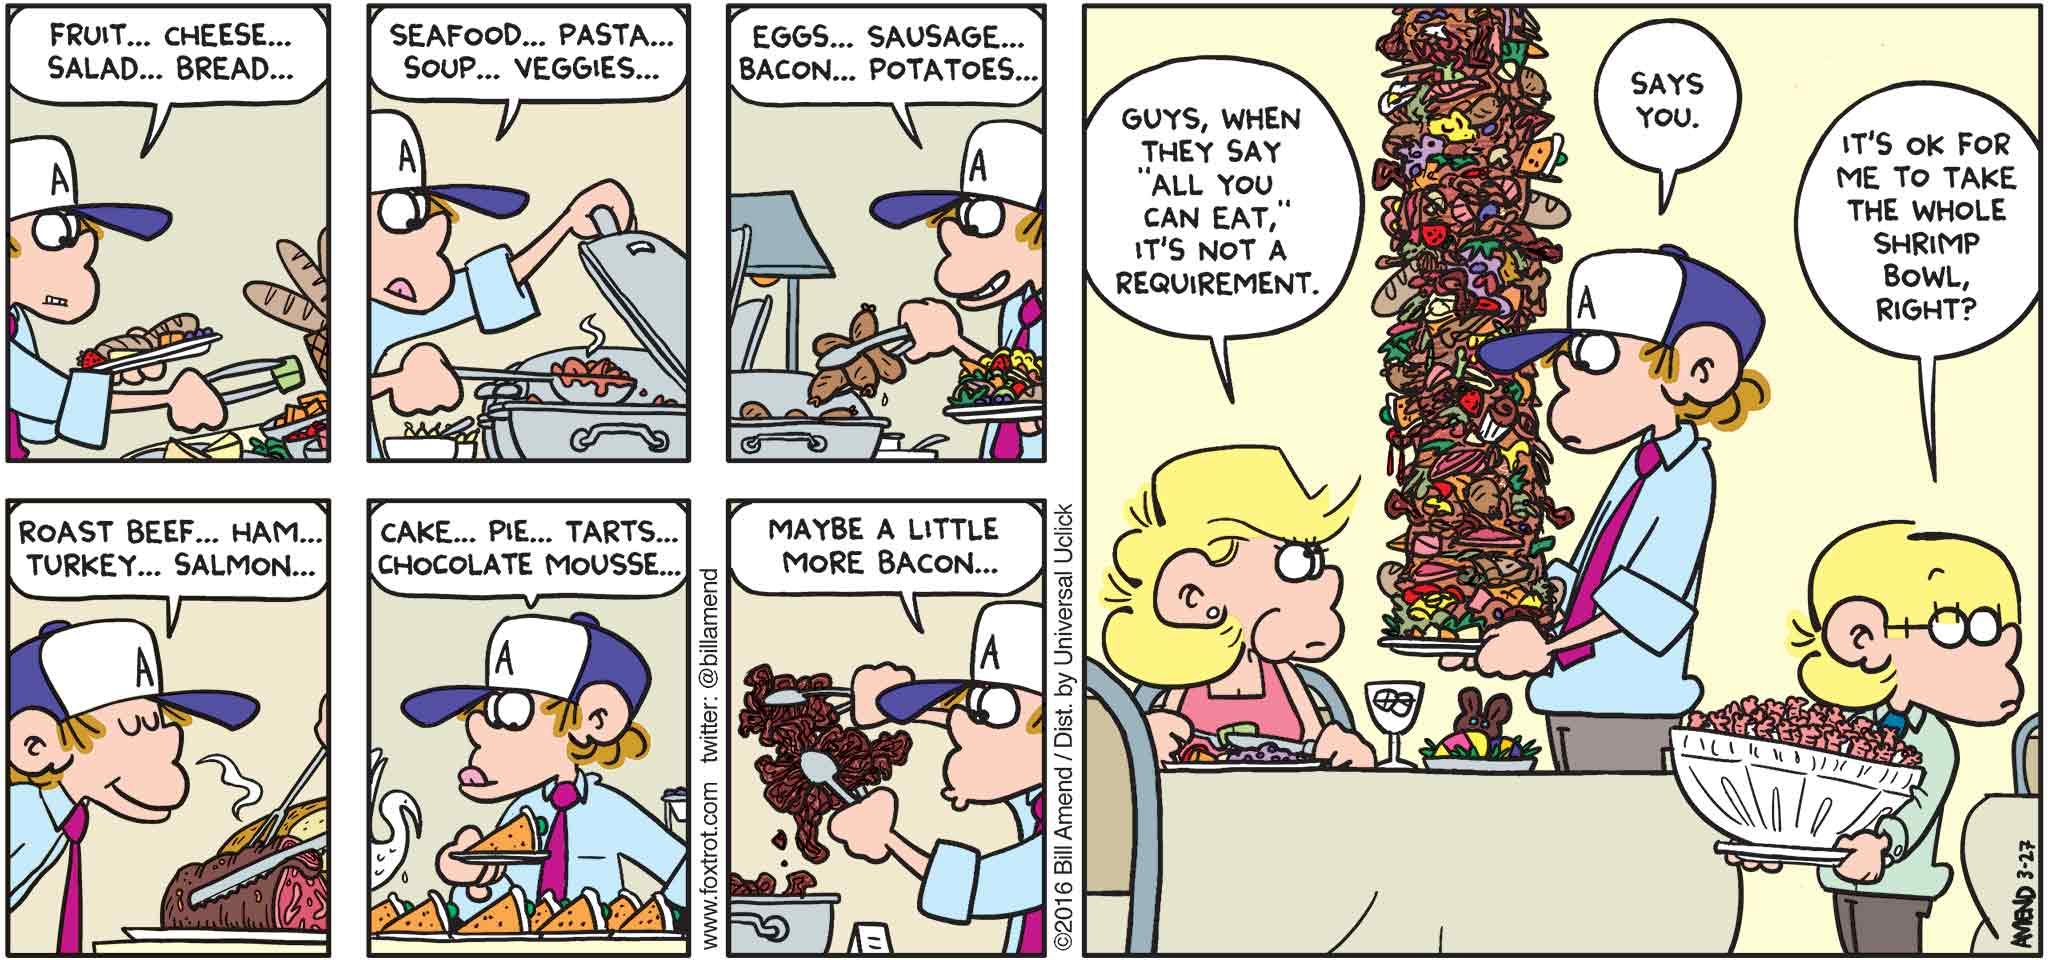 FoxTrot by Bill Amend - "Easter Piggies" published March 27, 2016 - Peter: Fruit... Cheese... Salad... Brad... Seafood... Pasta... Soup... Veggies... Eggs... Sausage... Baon... Potatoes... Roast Beef... Ham... Turkey... Salmon... Cake... Pie... Tarts... Chocolate Mousse... Maybe a little more bacon... Andy: Guys, when they say "all you can eat" it's not a requirement. Peter: Says you. Jason: It's ok for me to take the whole shrimp bowl, right?